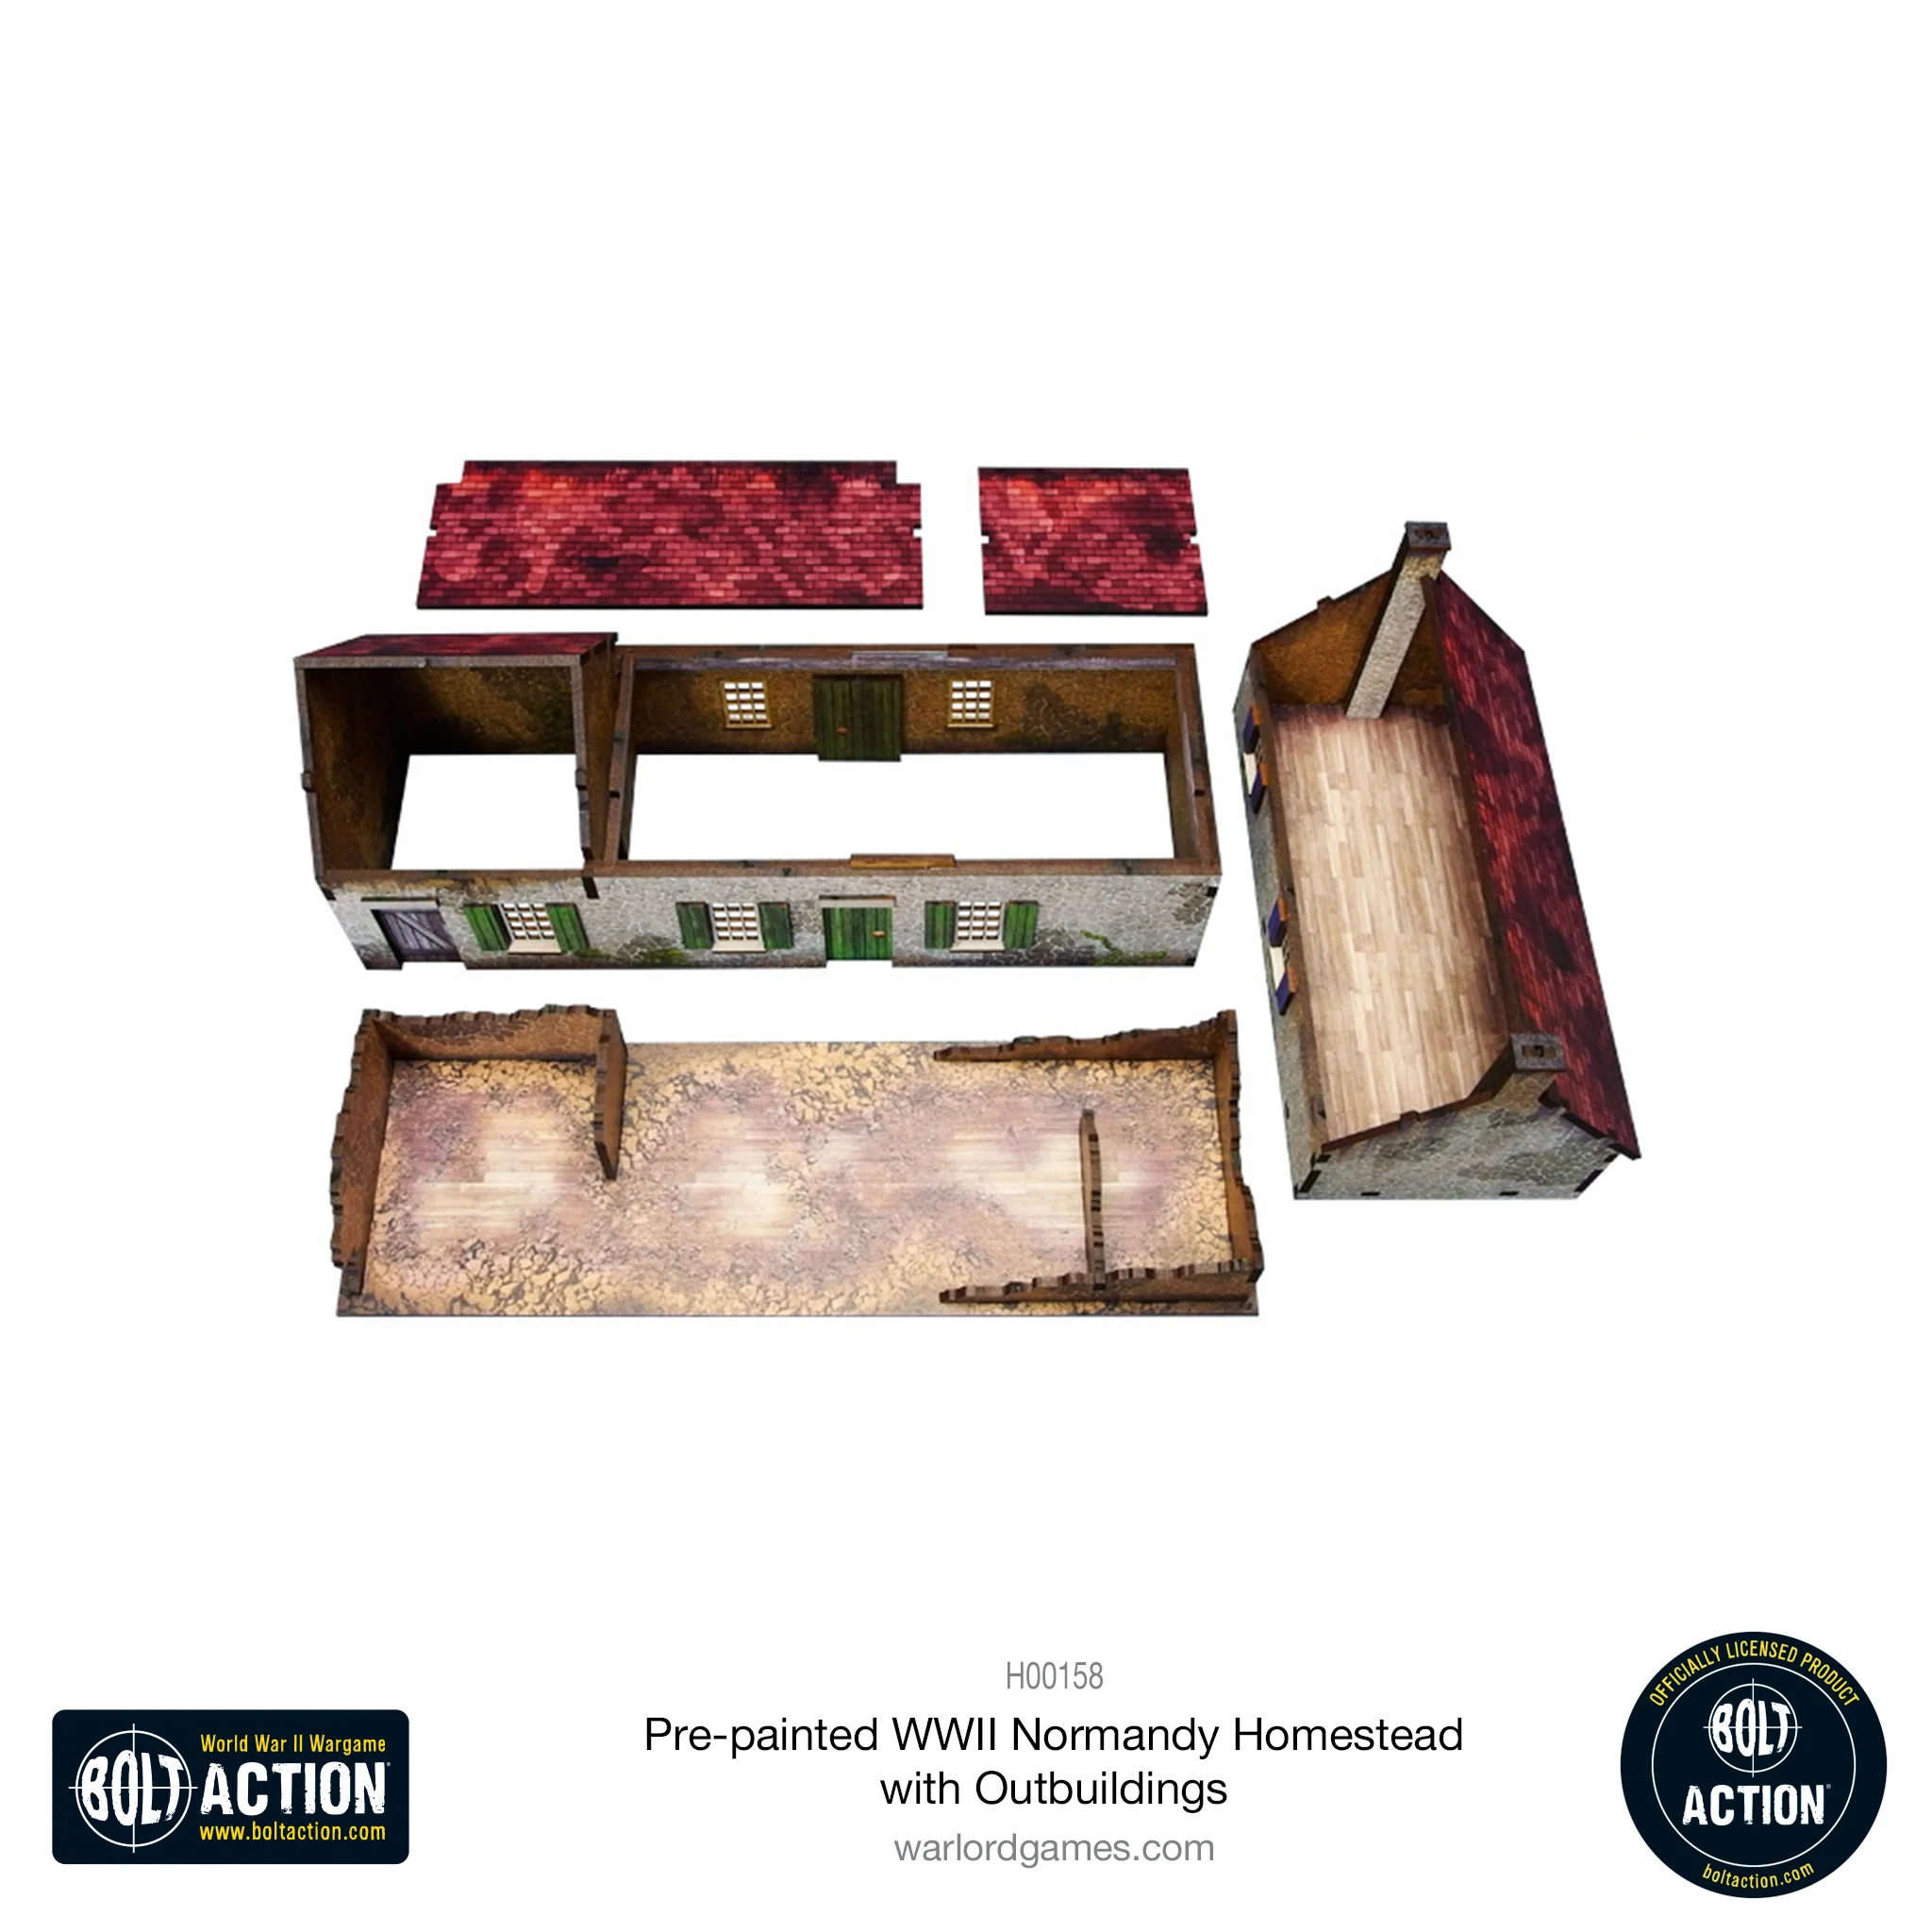 Bolt Action: Pre-painted WWII Normandy Homestead with Outbuildings-1711115799-Kgl9w.webp